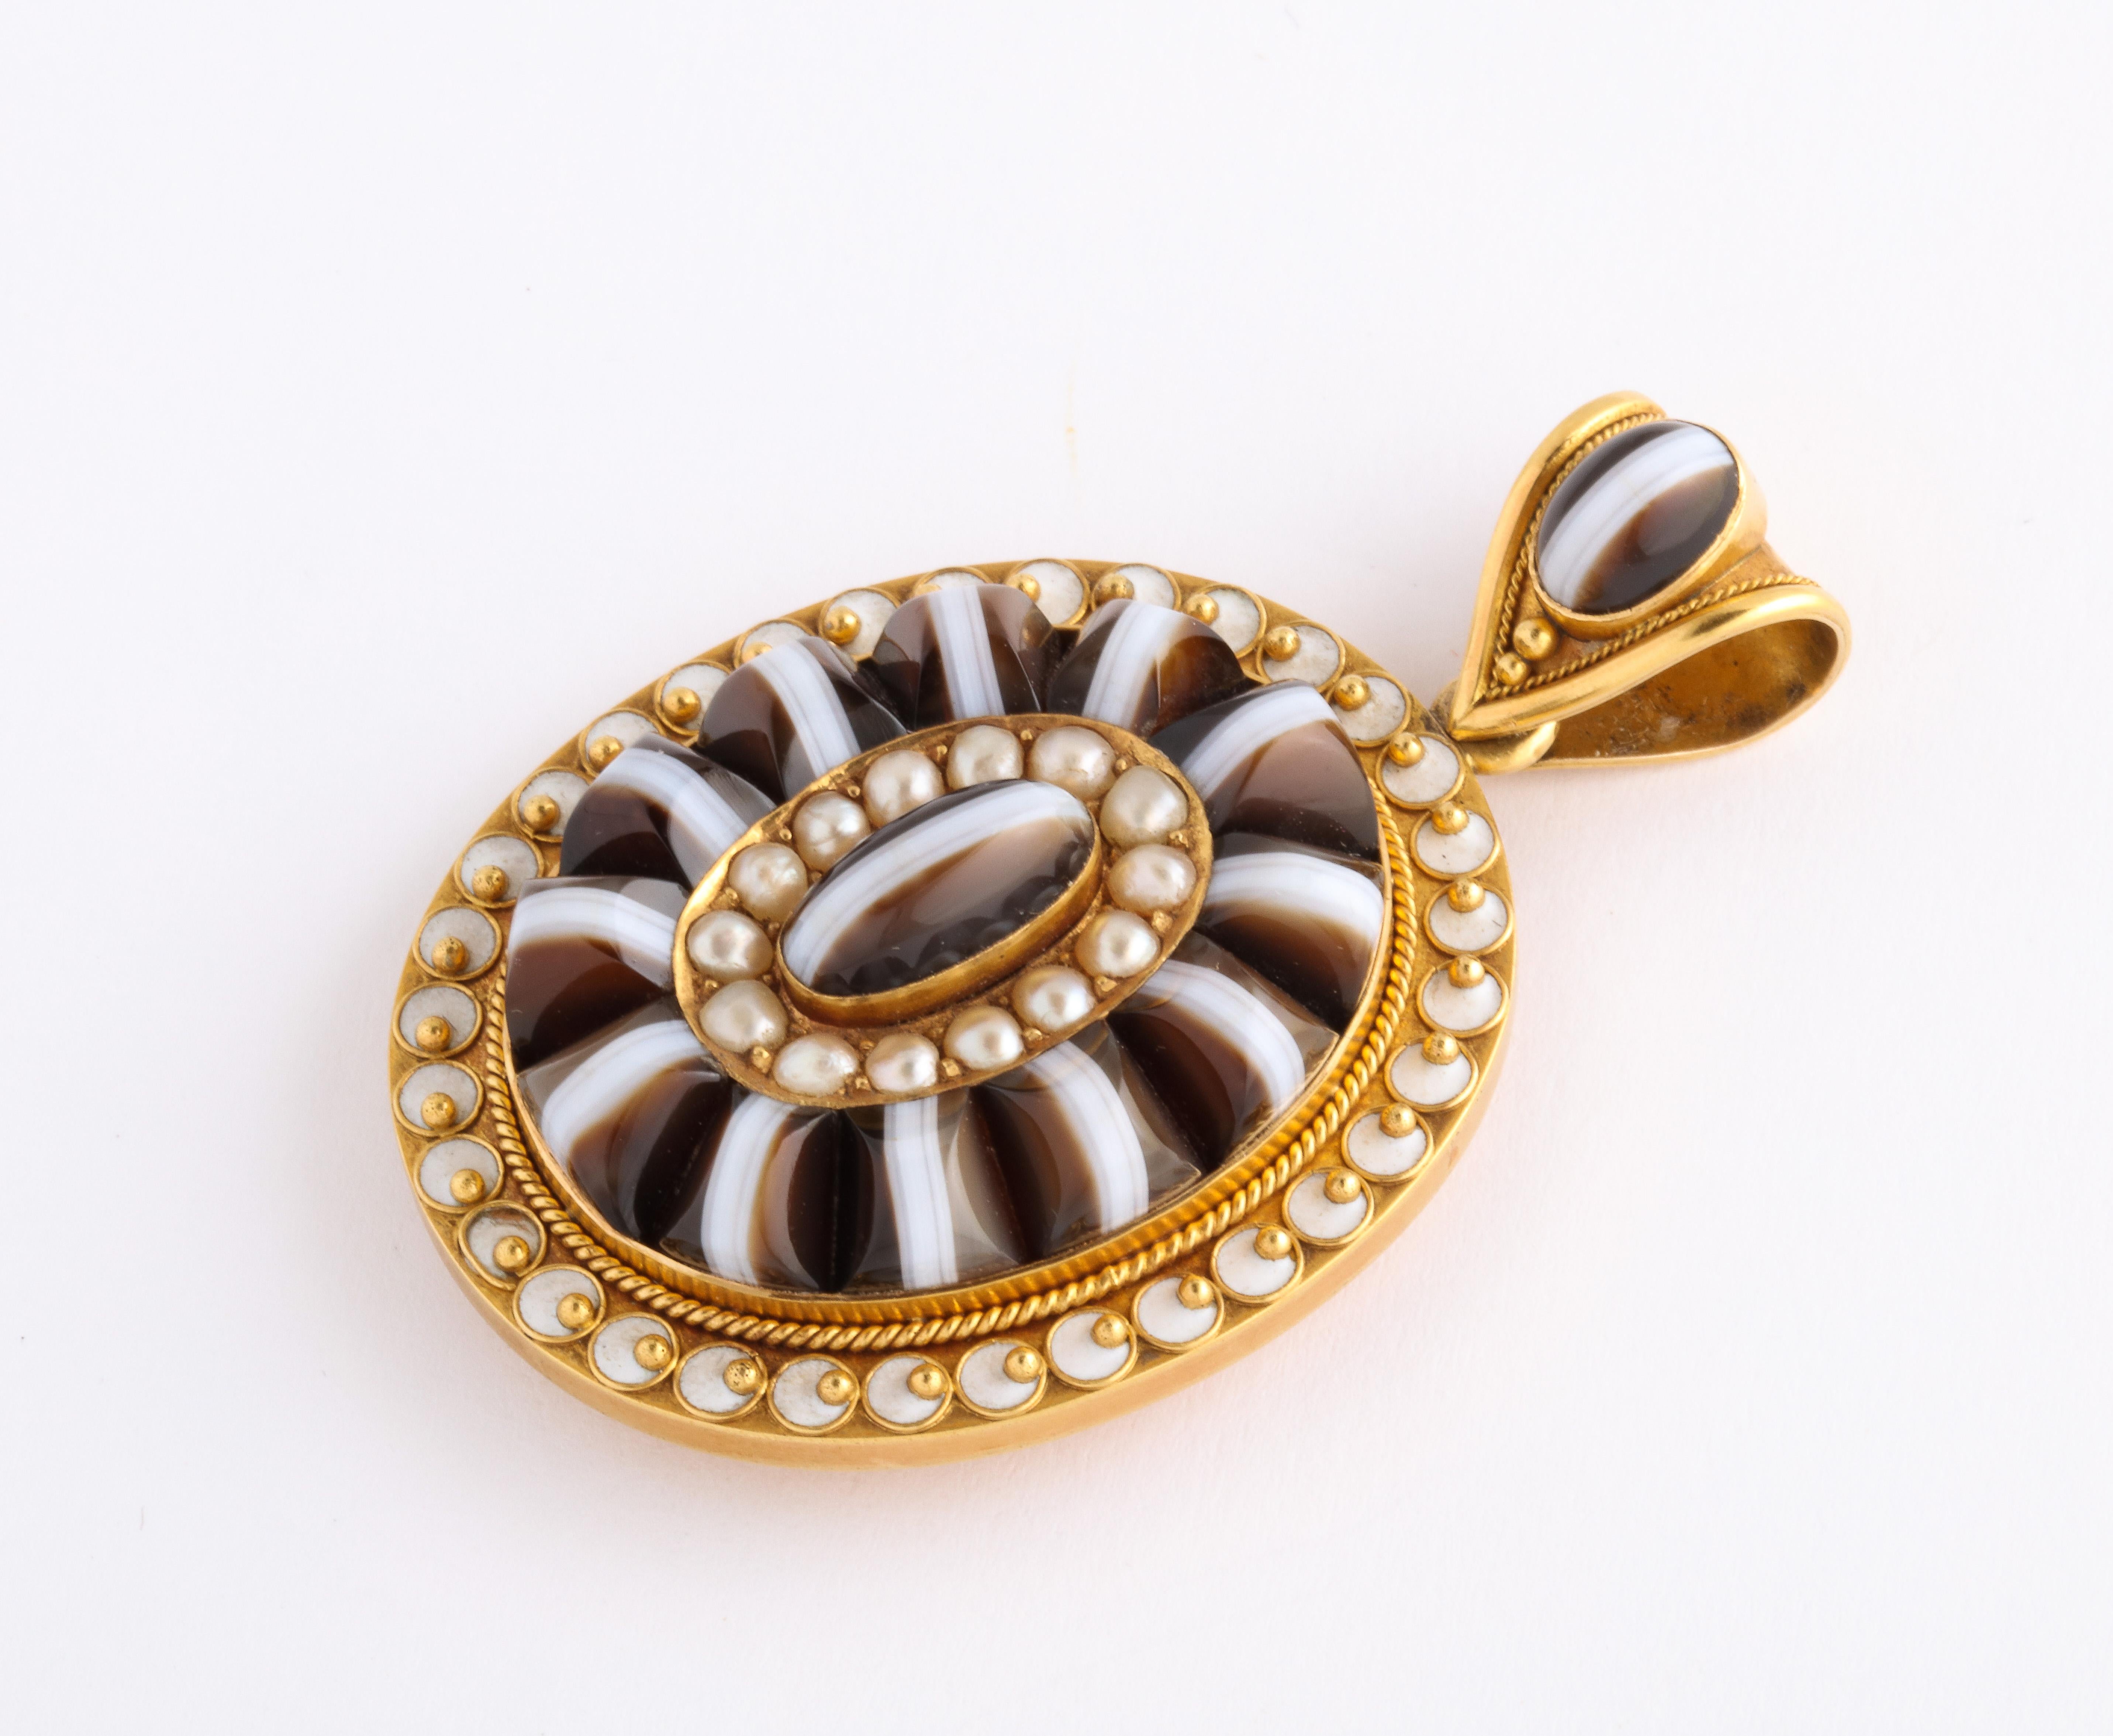 Spectacular Victorian 15 Kt gold, banded agate, natural pearl and enamel pendant screams its rarity and beauty though it is not brazen, but insistent. All parts are original to the master jeweler who created it c. 1860-70. The banded agates gleam